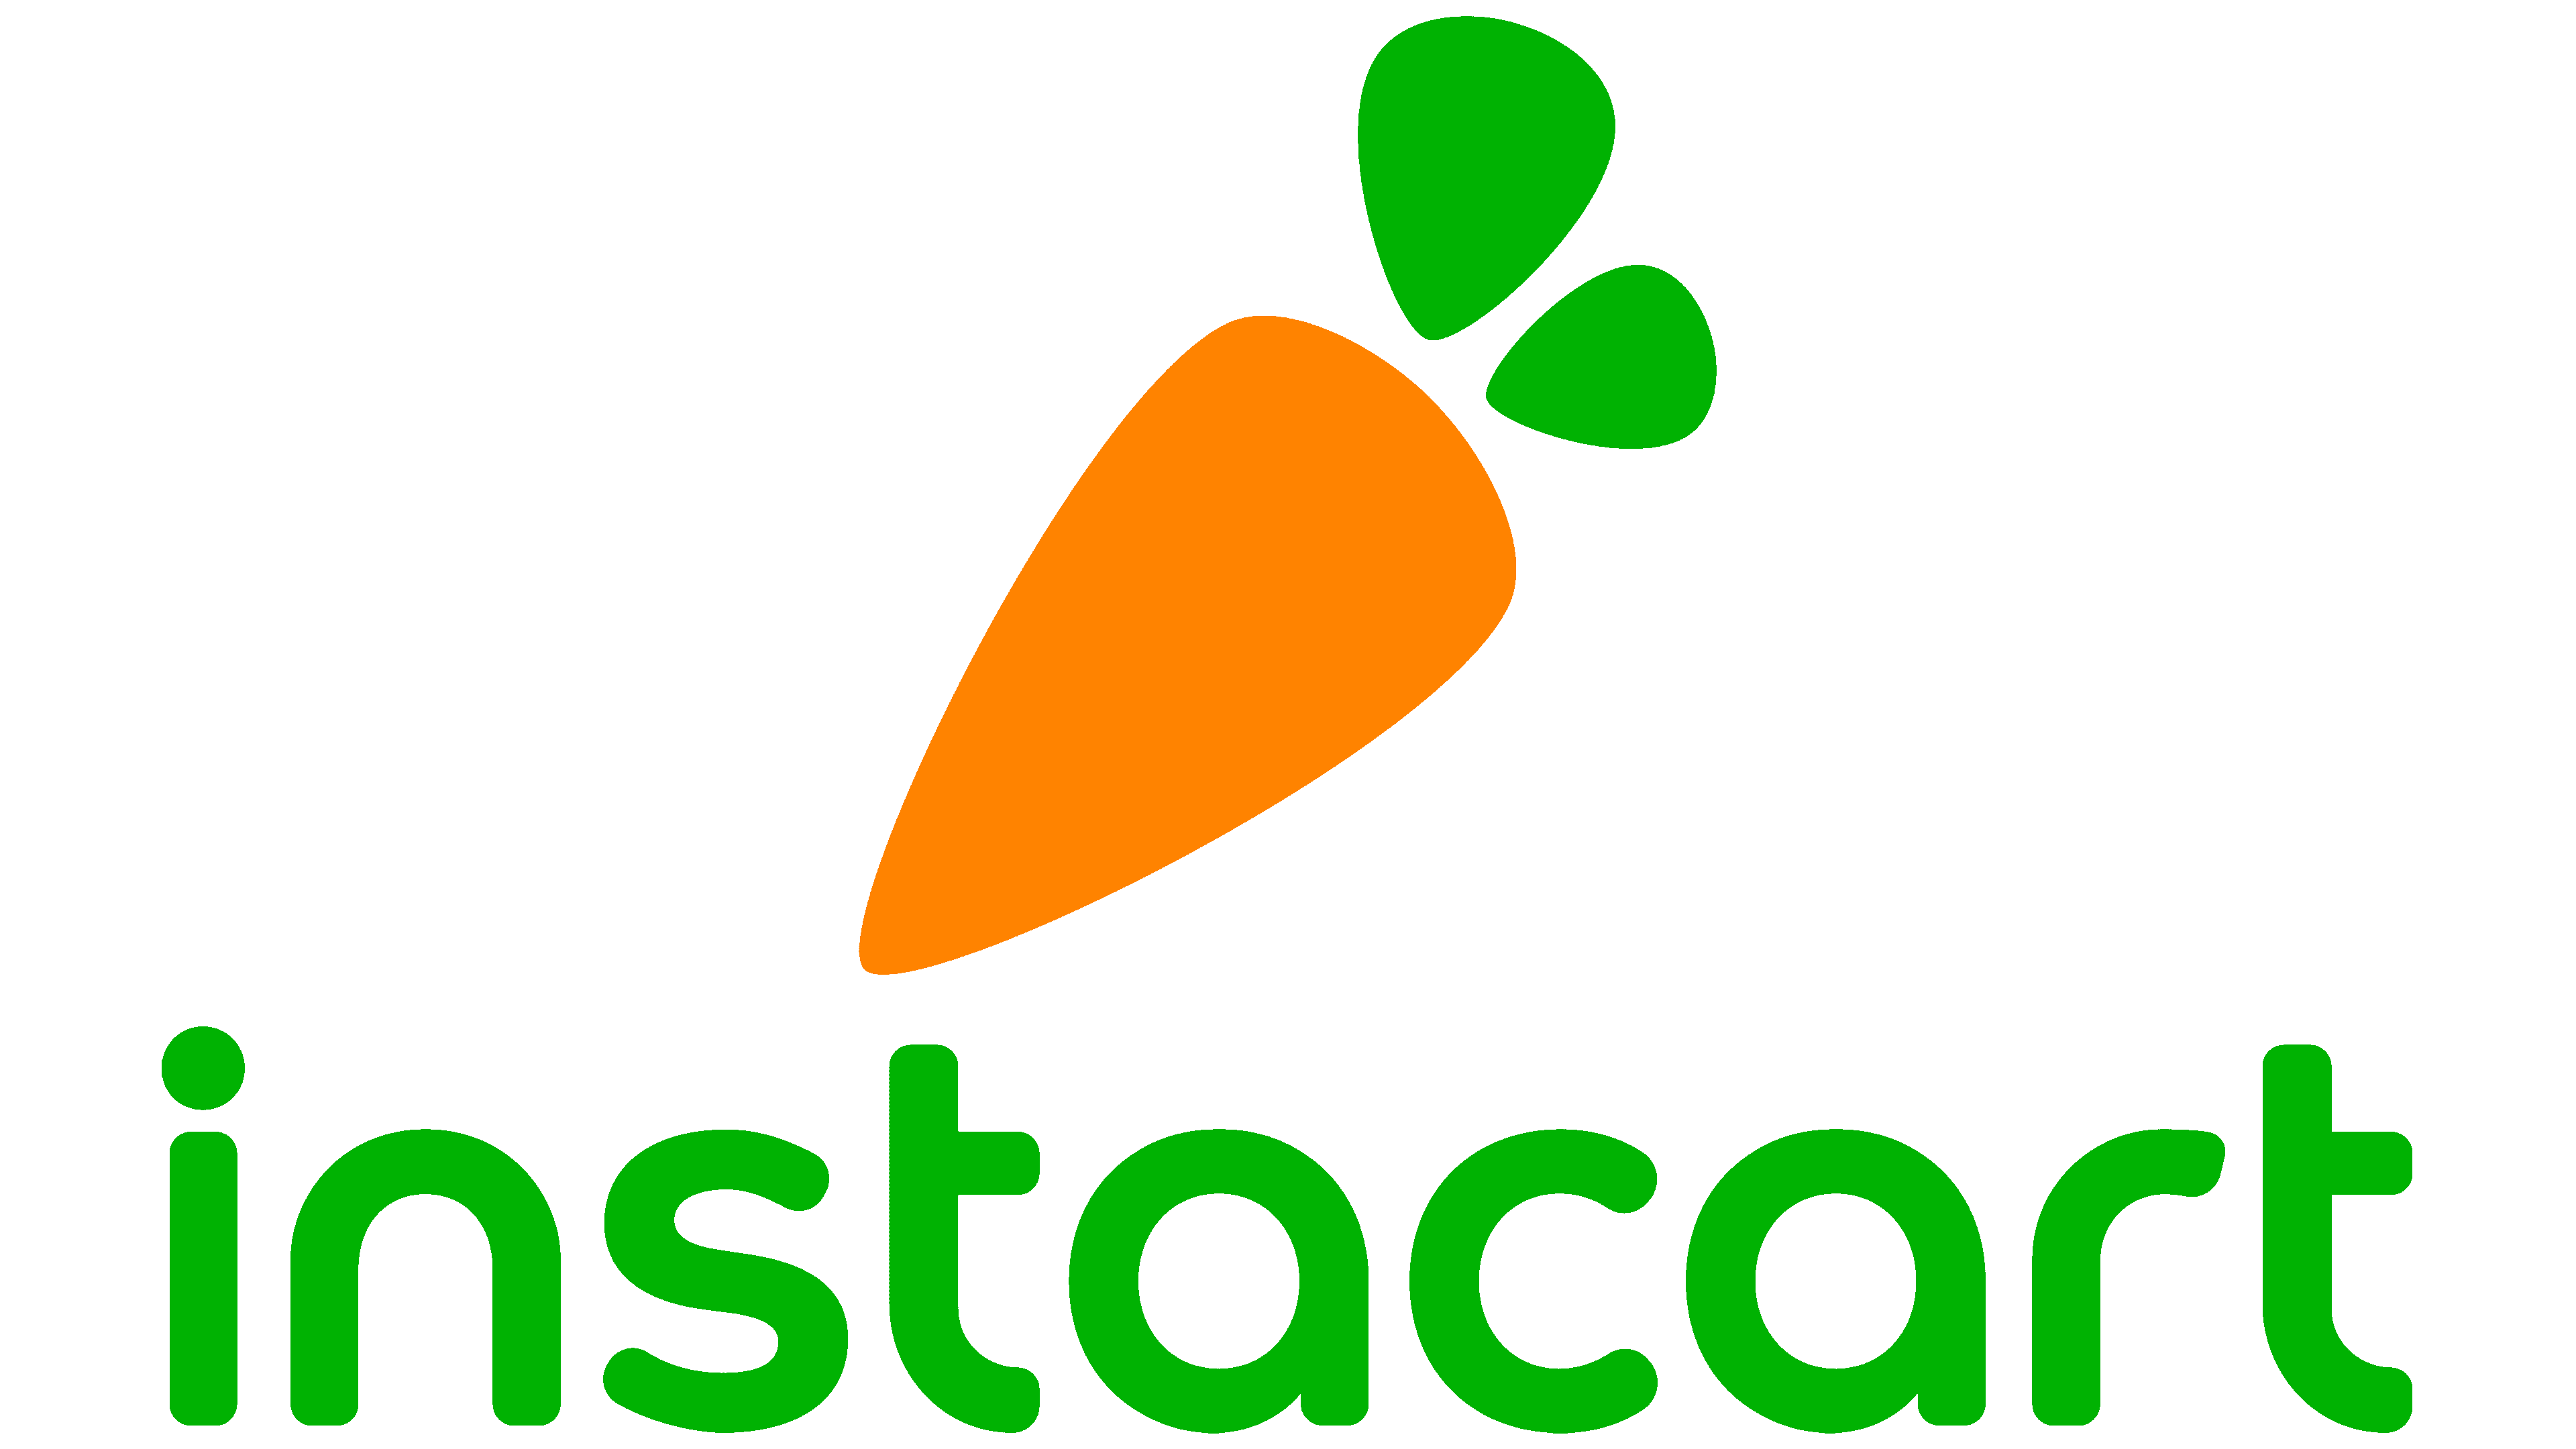 Instacart Logo, symbol, meaning, history, PNG, brand